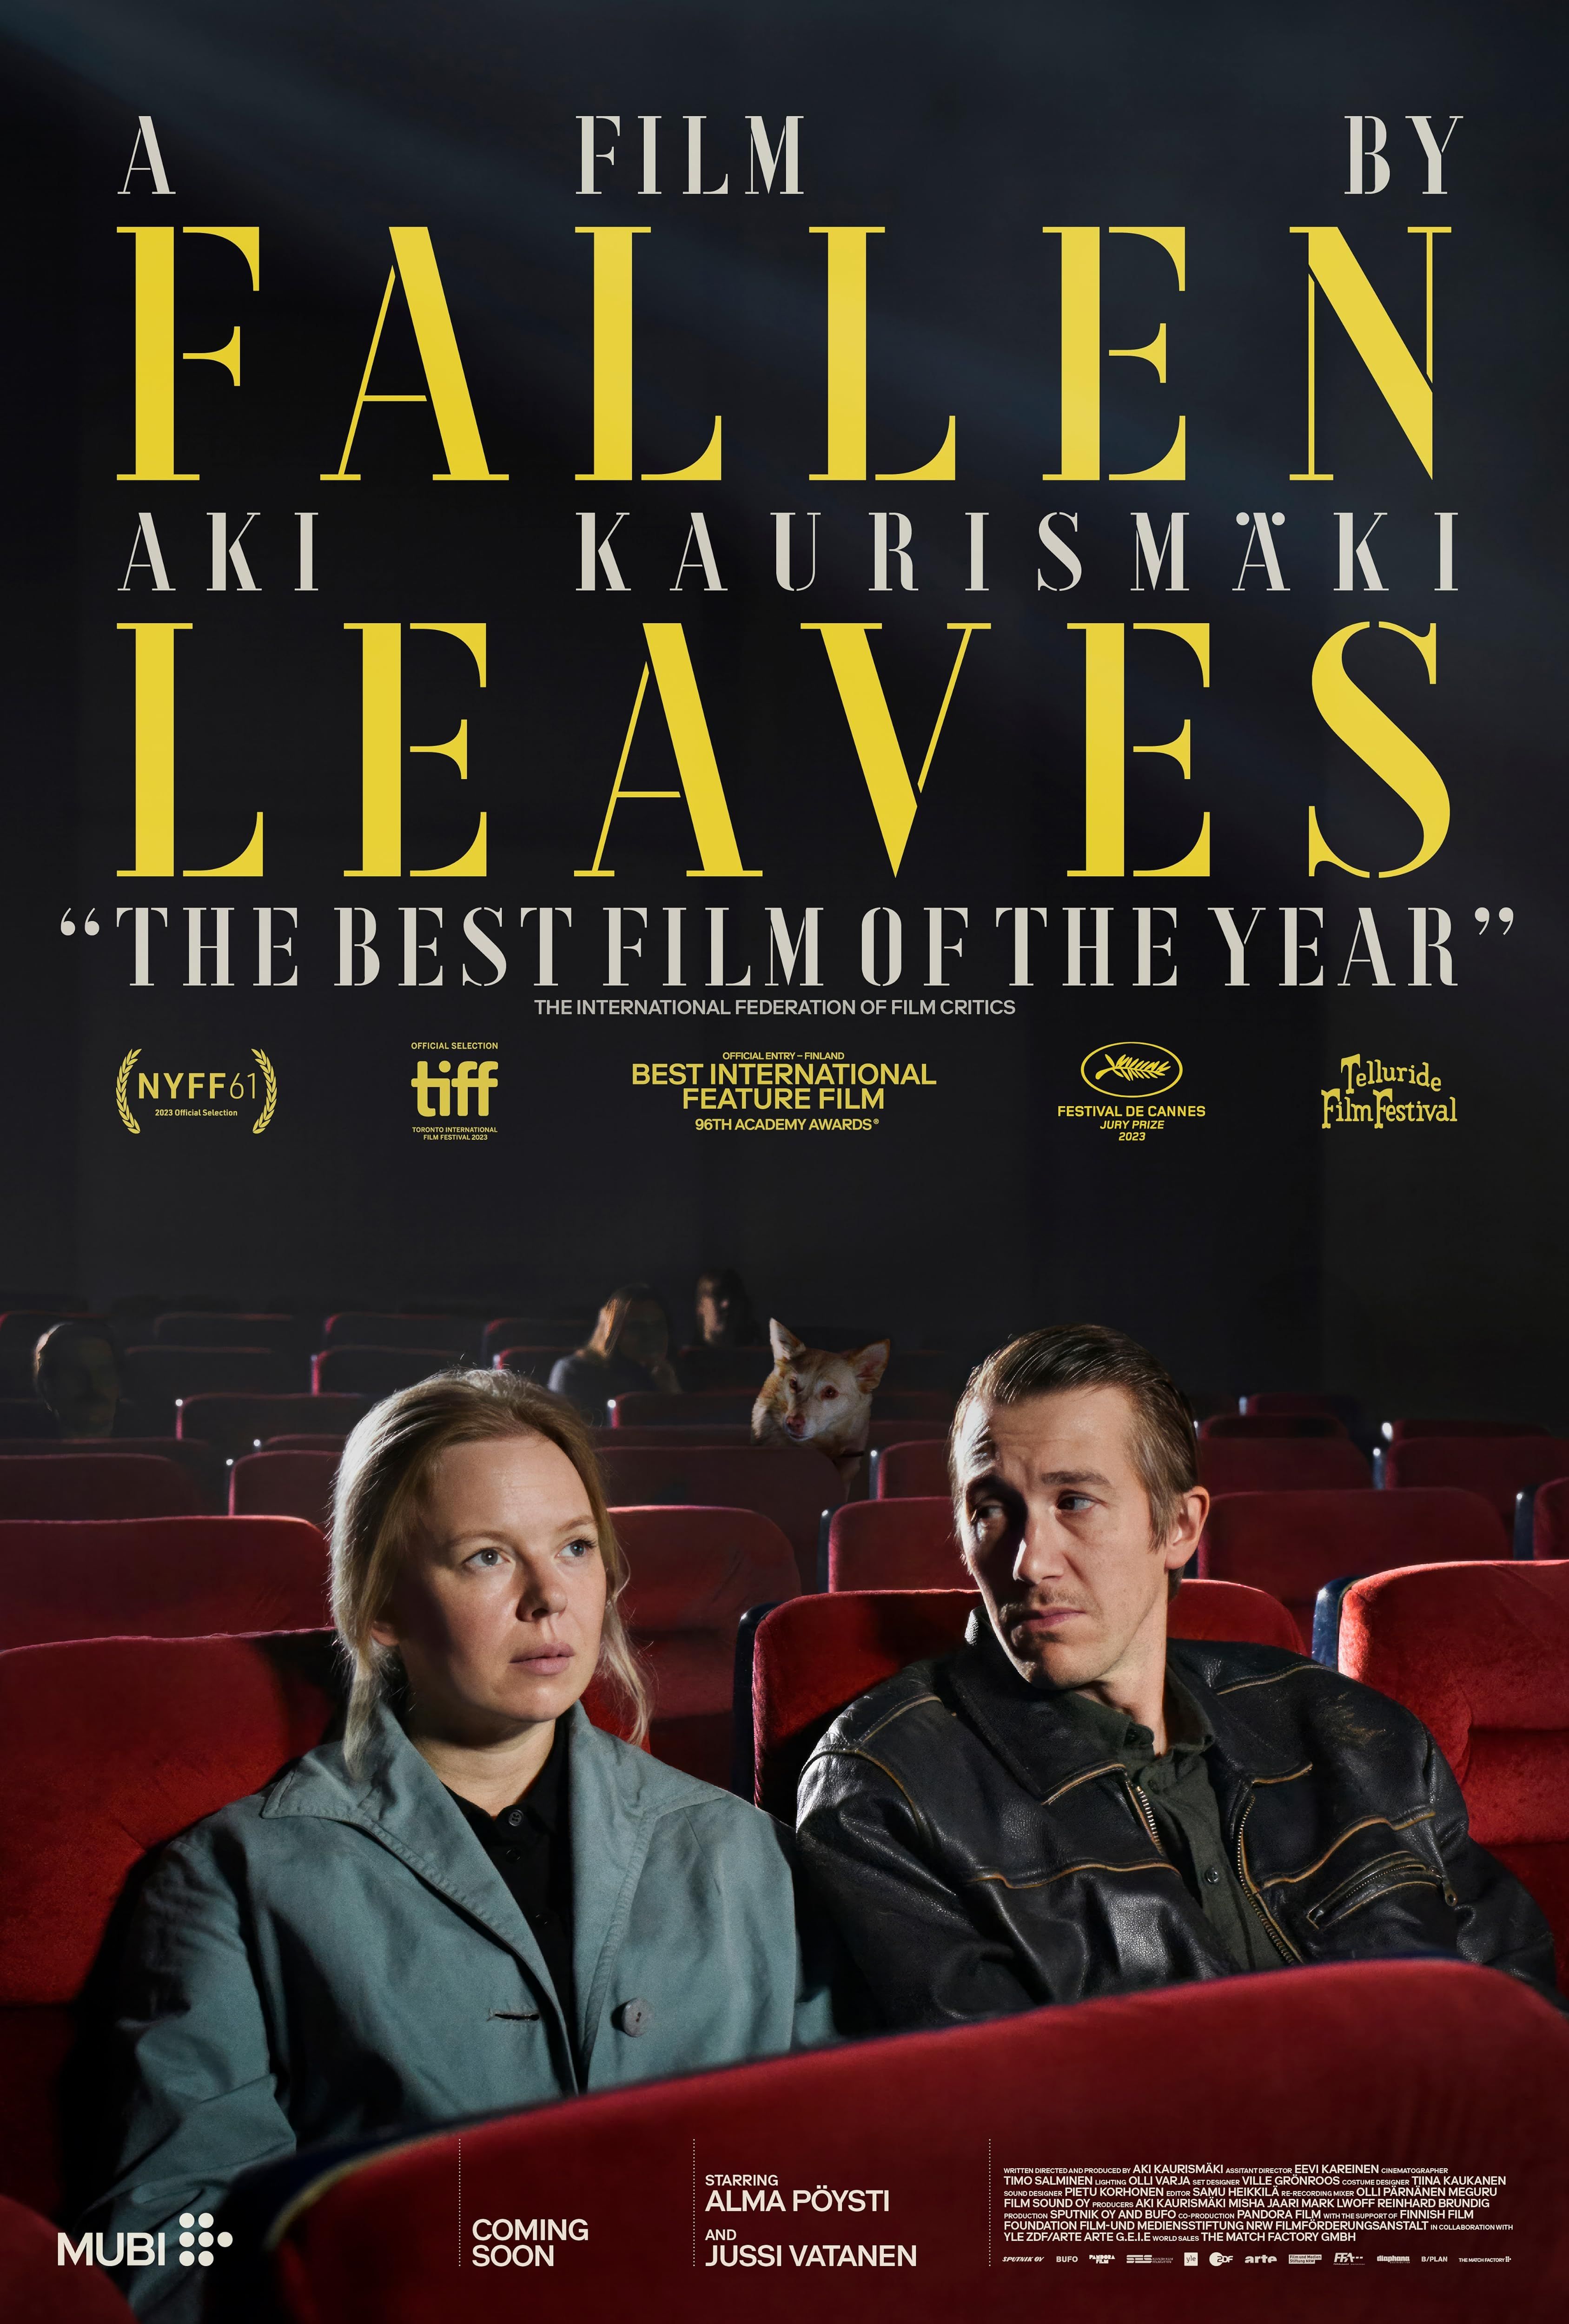 A poster for Fallen Leaves